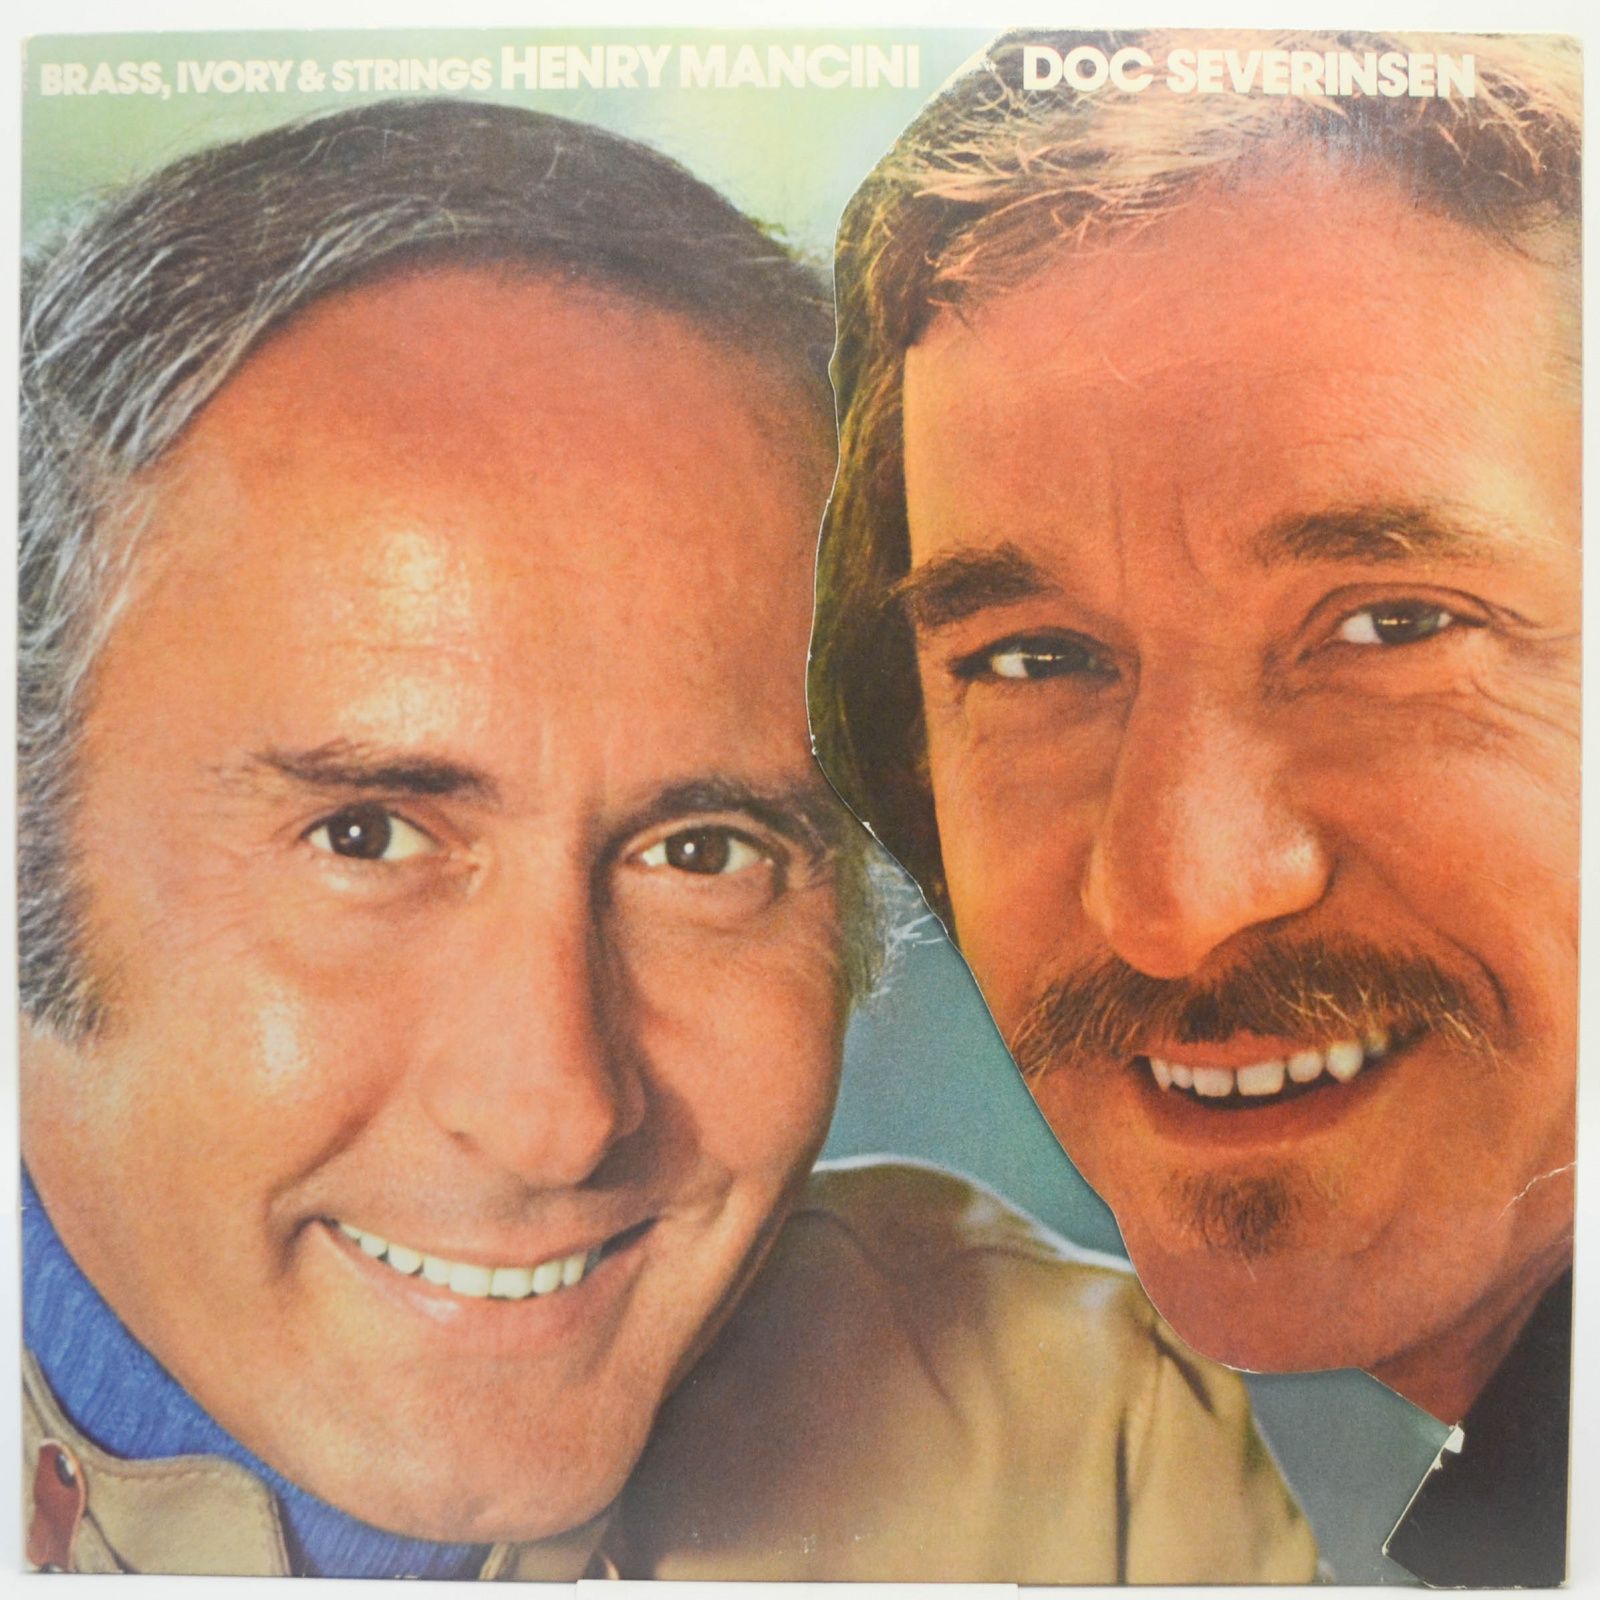 Henry Mancini And Doc Severinsen — Brass, Ivory & Strings (USA), 1973